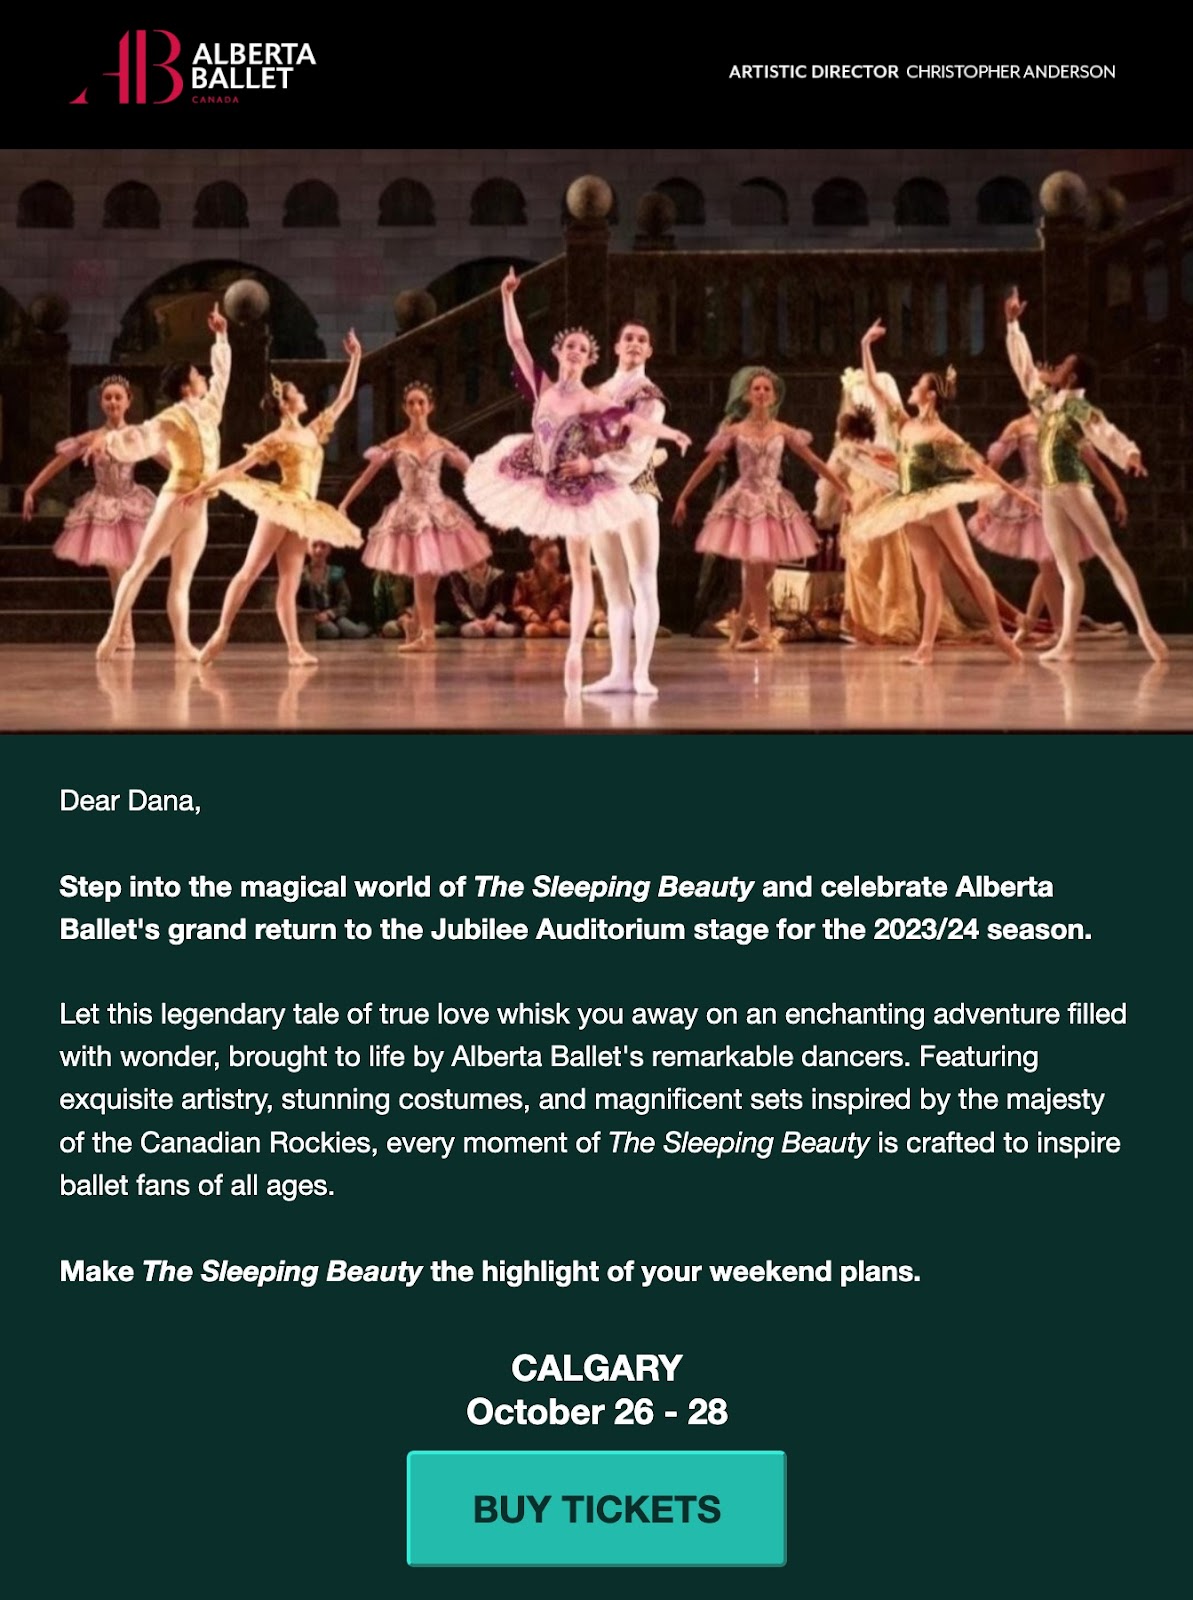 Alberta Ballet's email promoting an upcoming show and ticket sales